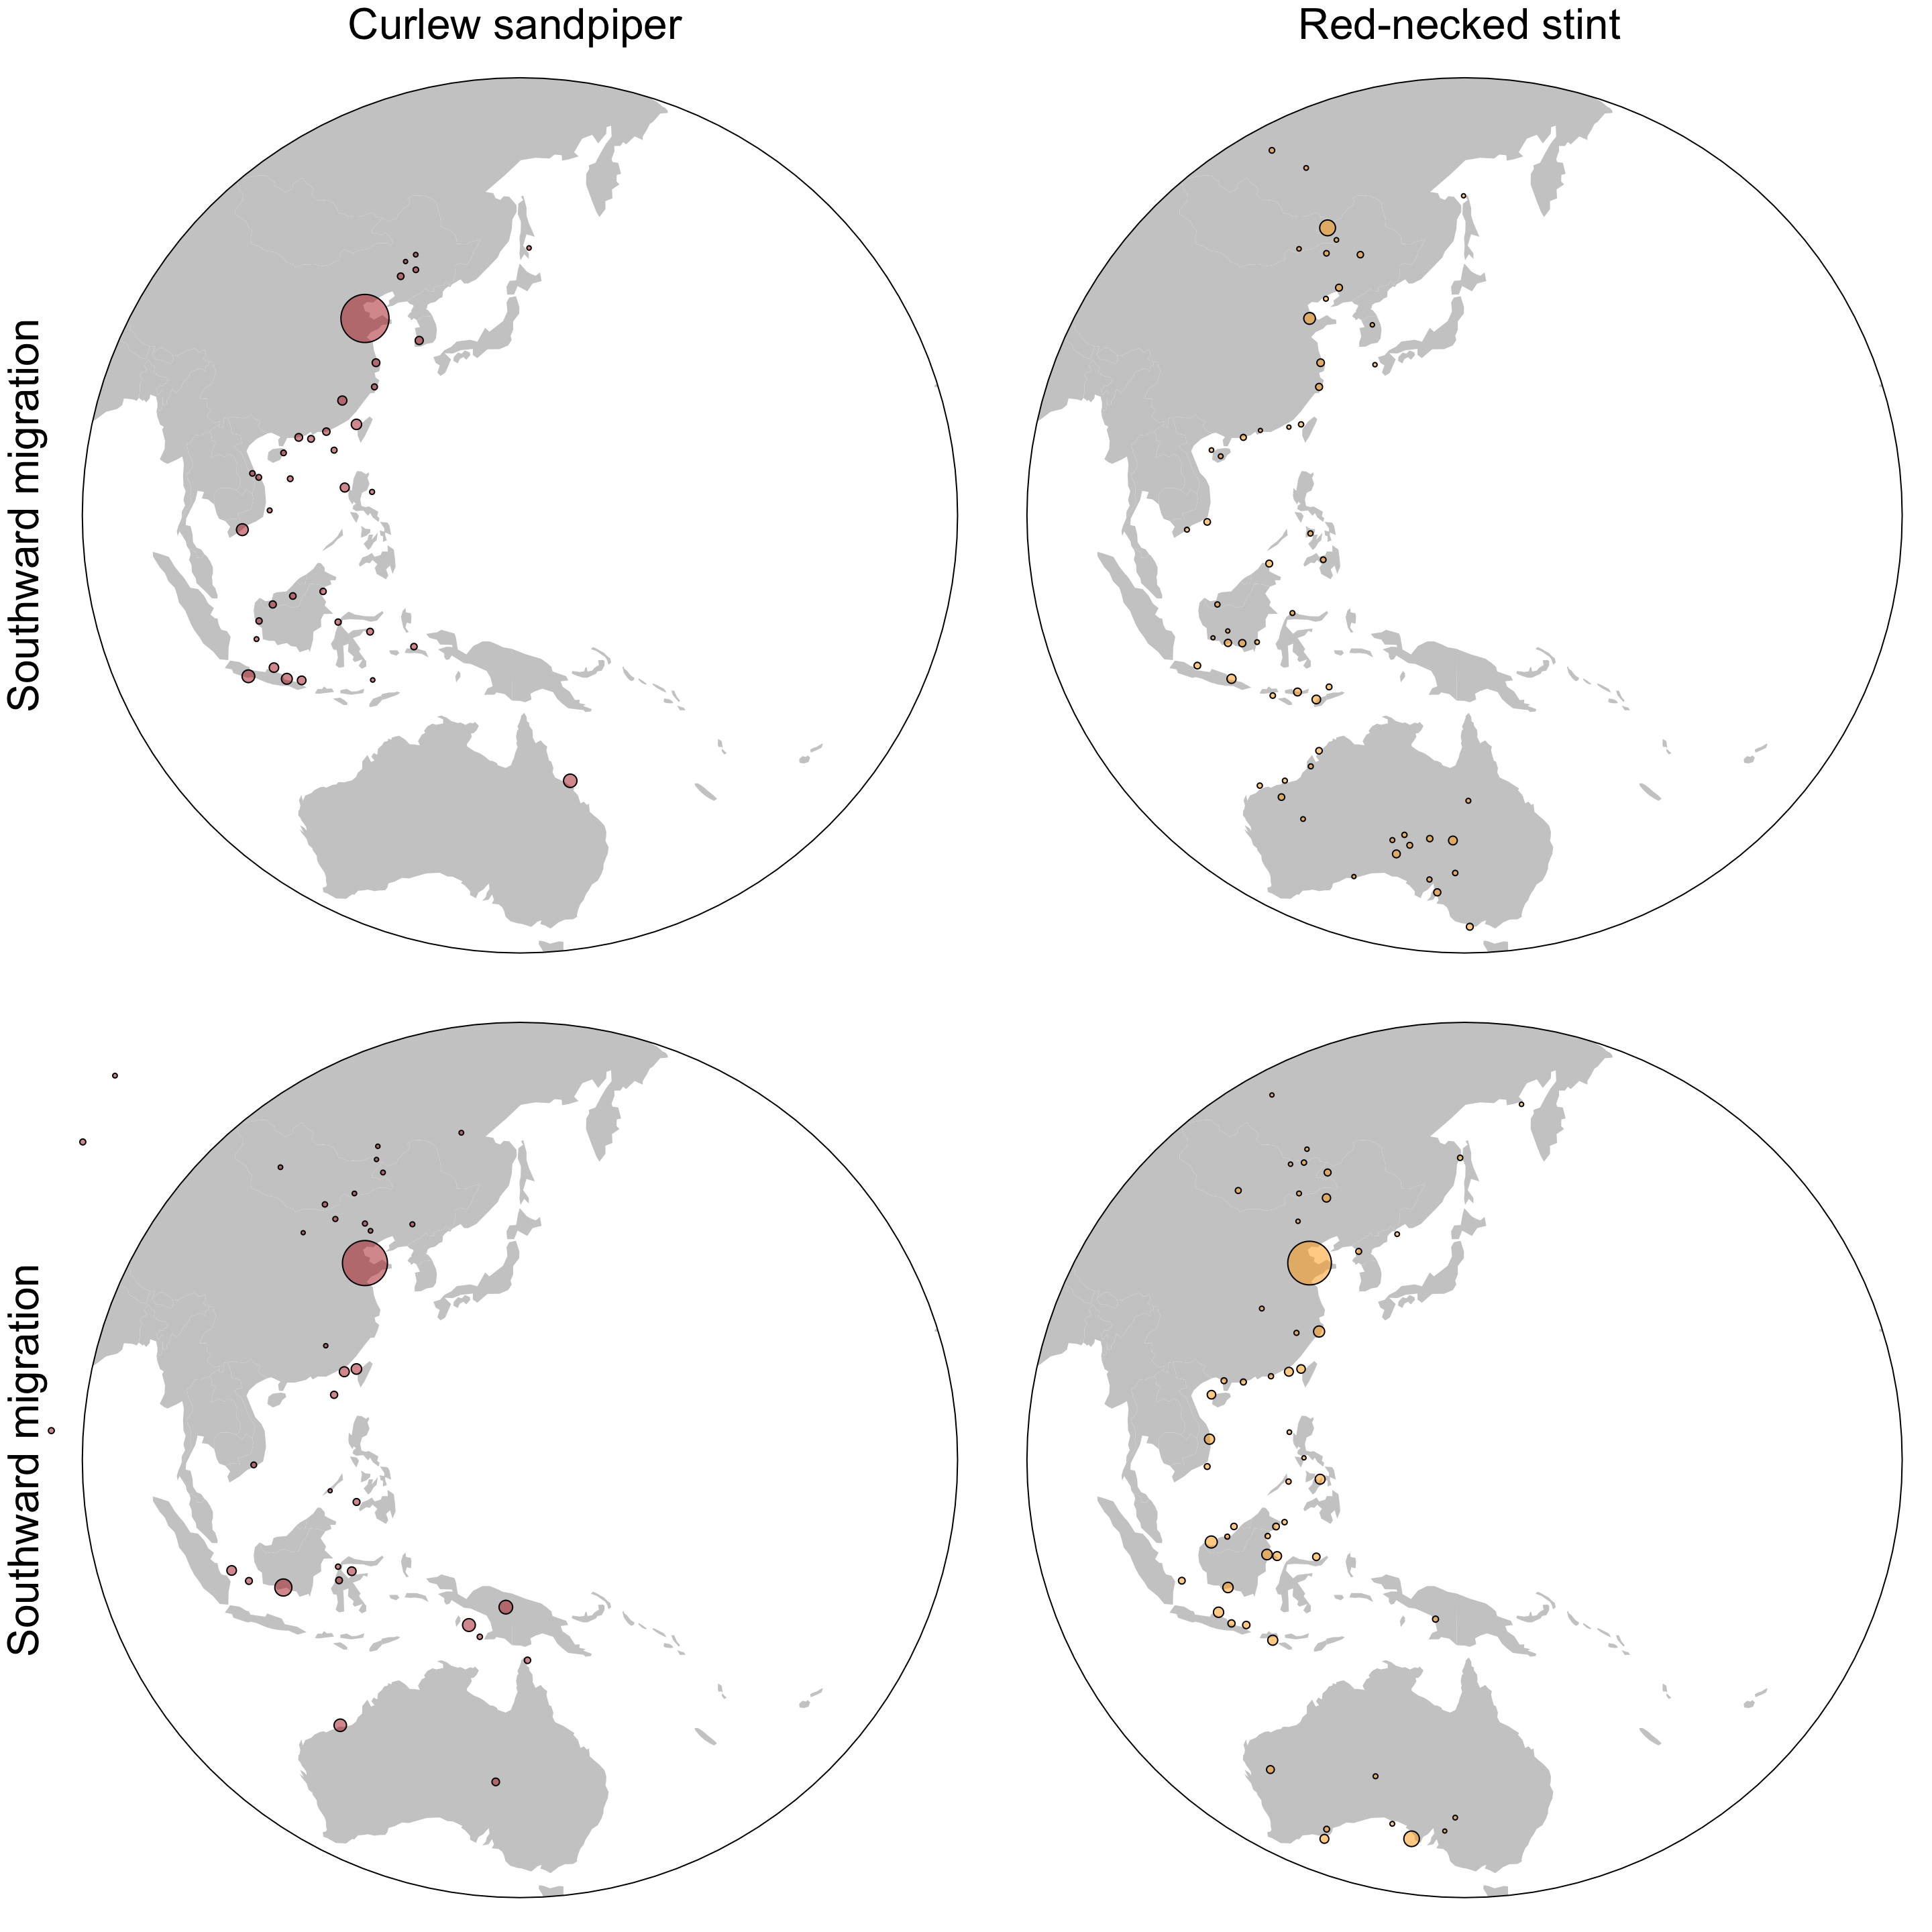 The maps show the stopover sites of Curlew sandpipers (left) and Red-necked stints (right) for both migratory seasons. Each dot represents a cluster of stopover sites, meaning that individual stopover sites are merged together. The size of the circles represent the sum of the time the individuals spent in the cluster.